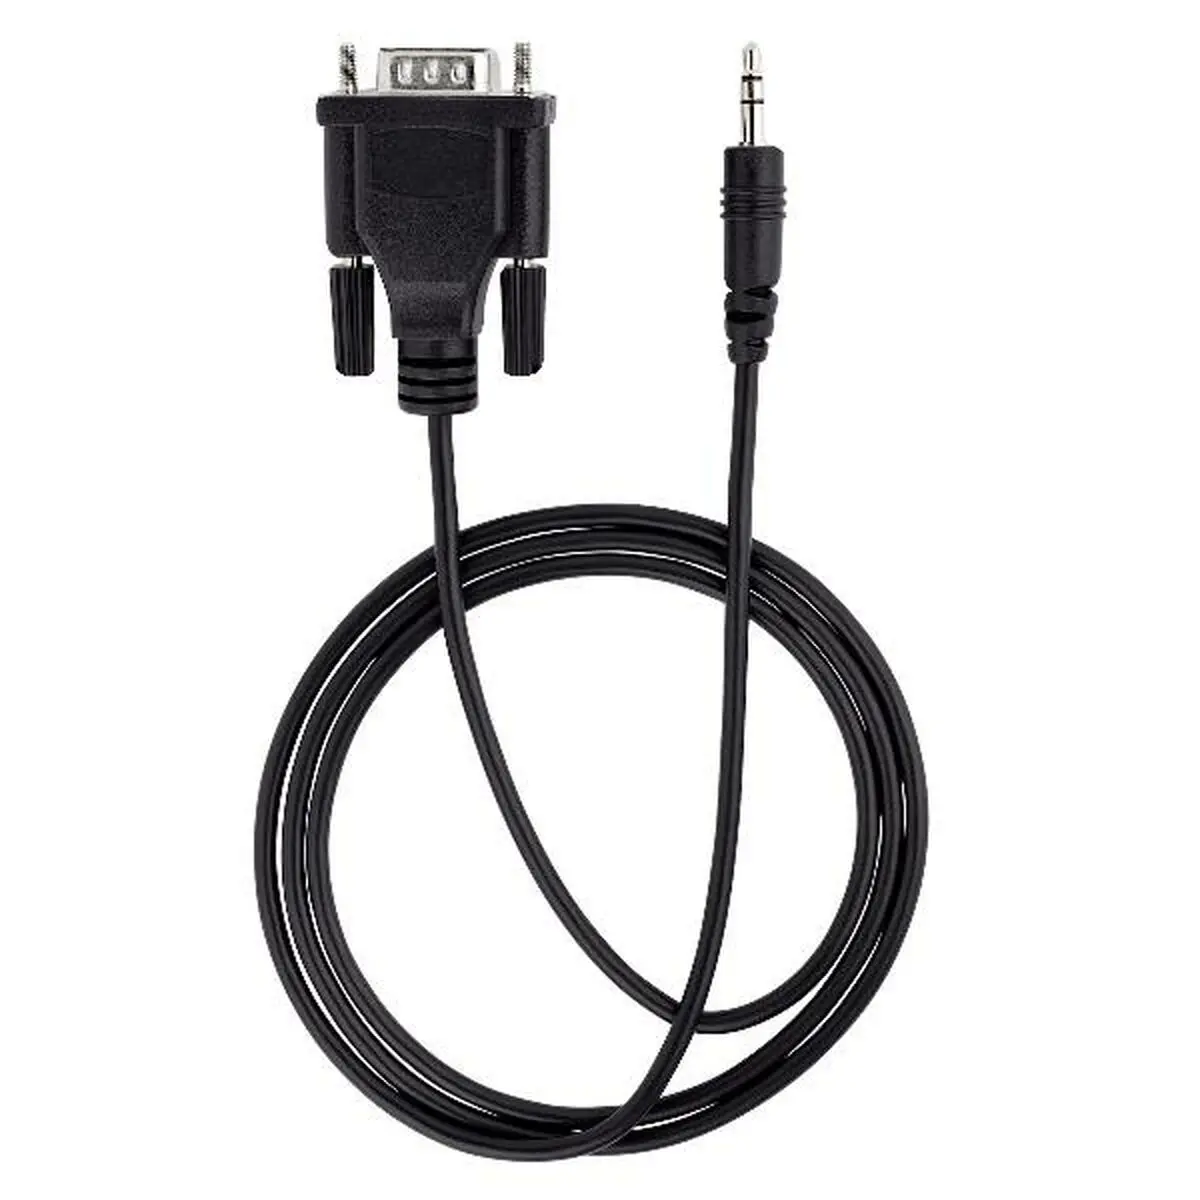 Cavo Audio Jack (3,5 mm) Startech 9M351M-RS232-CABLE